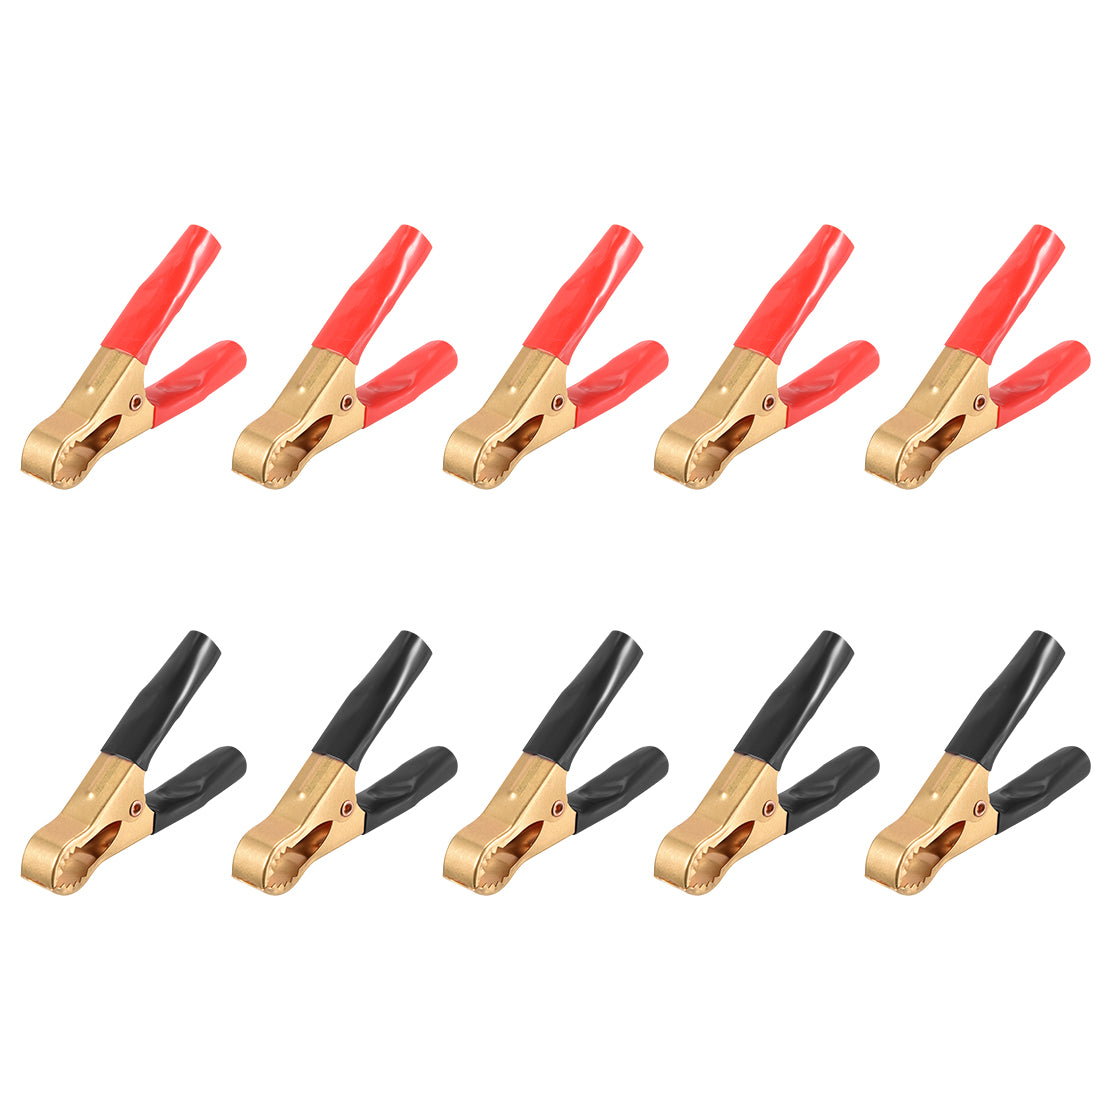 uxcell Uxcell 10 Pcs Pure Copper Alligator Clip Adapter 50A Test Clamp Half Shroud Red Black